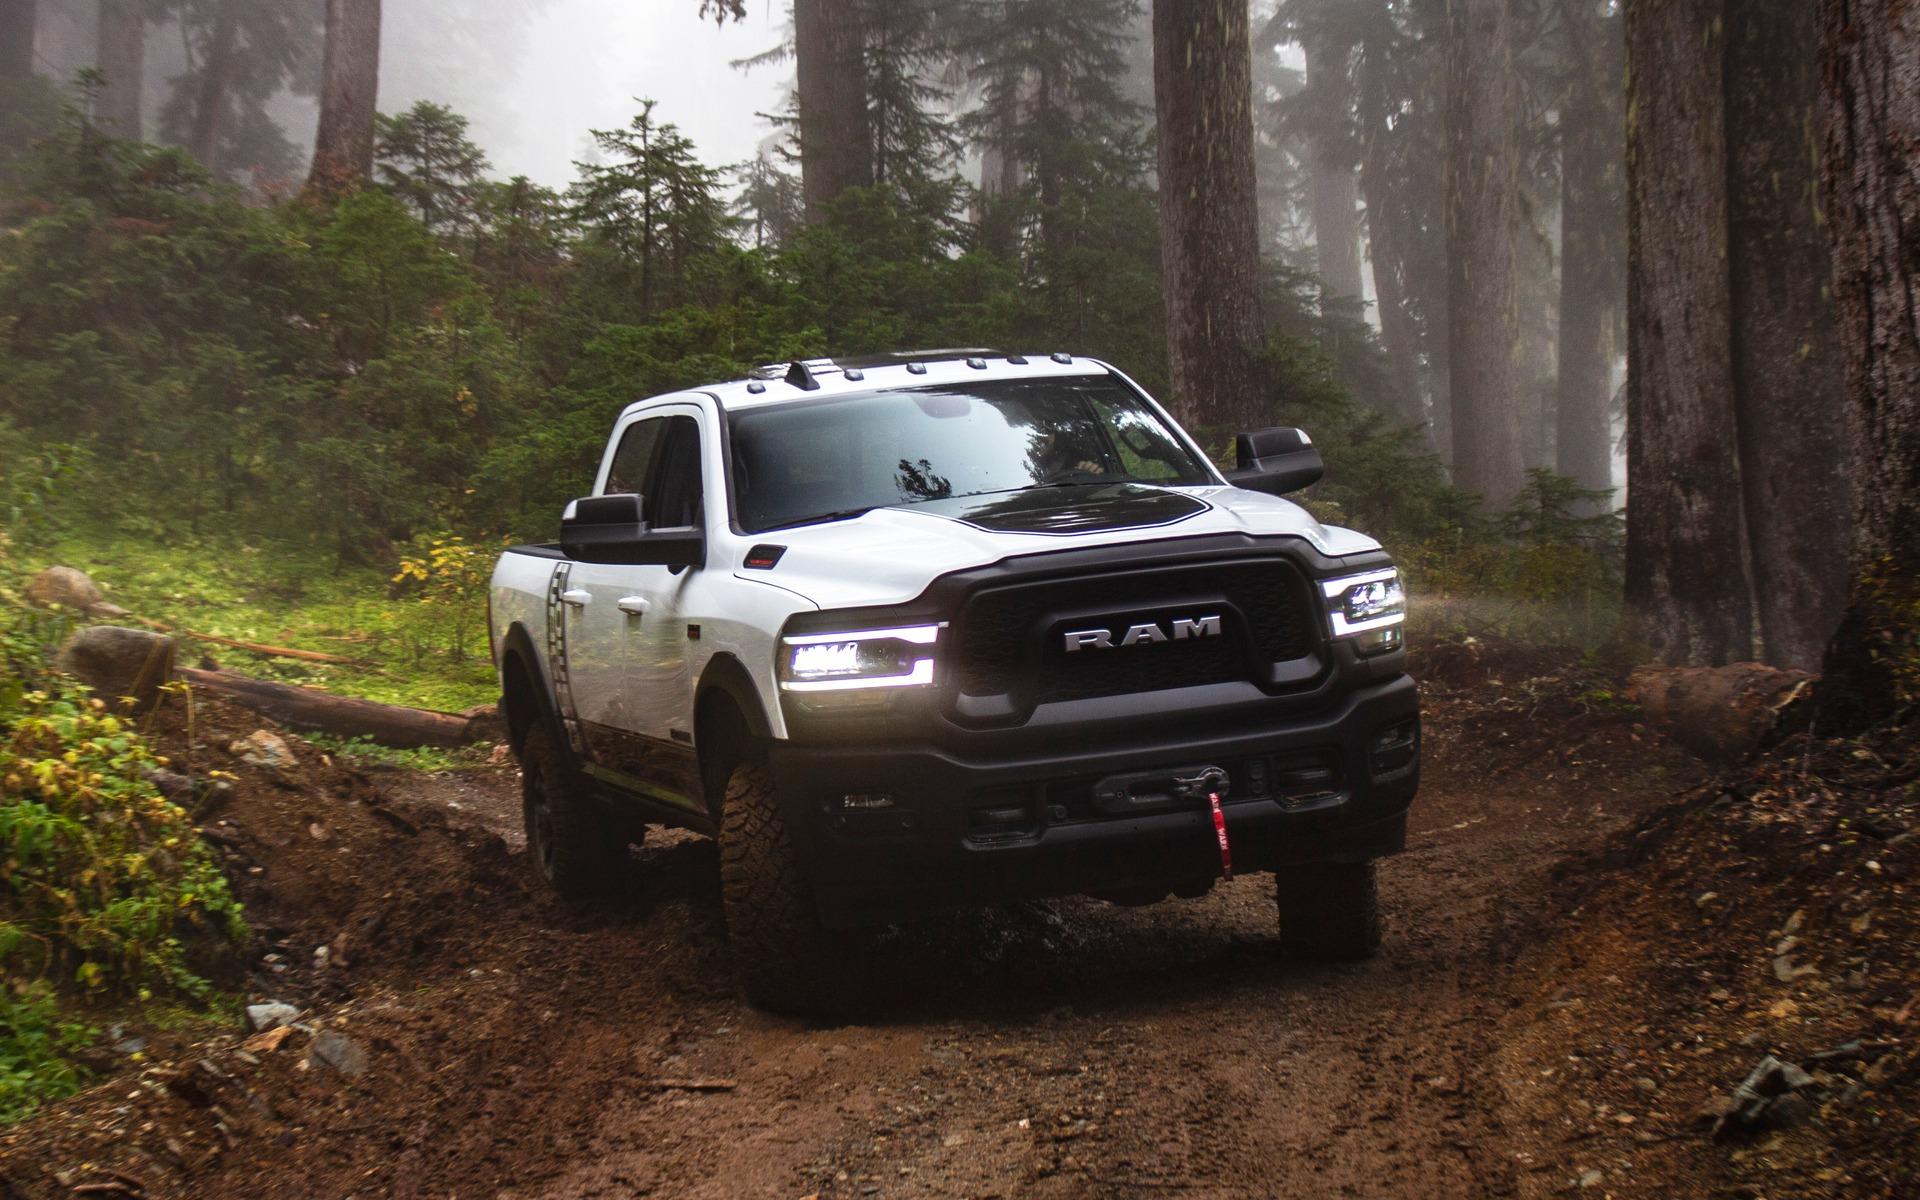 Ram Power Wagon: The Mean Workhorse Car Guide